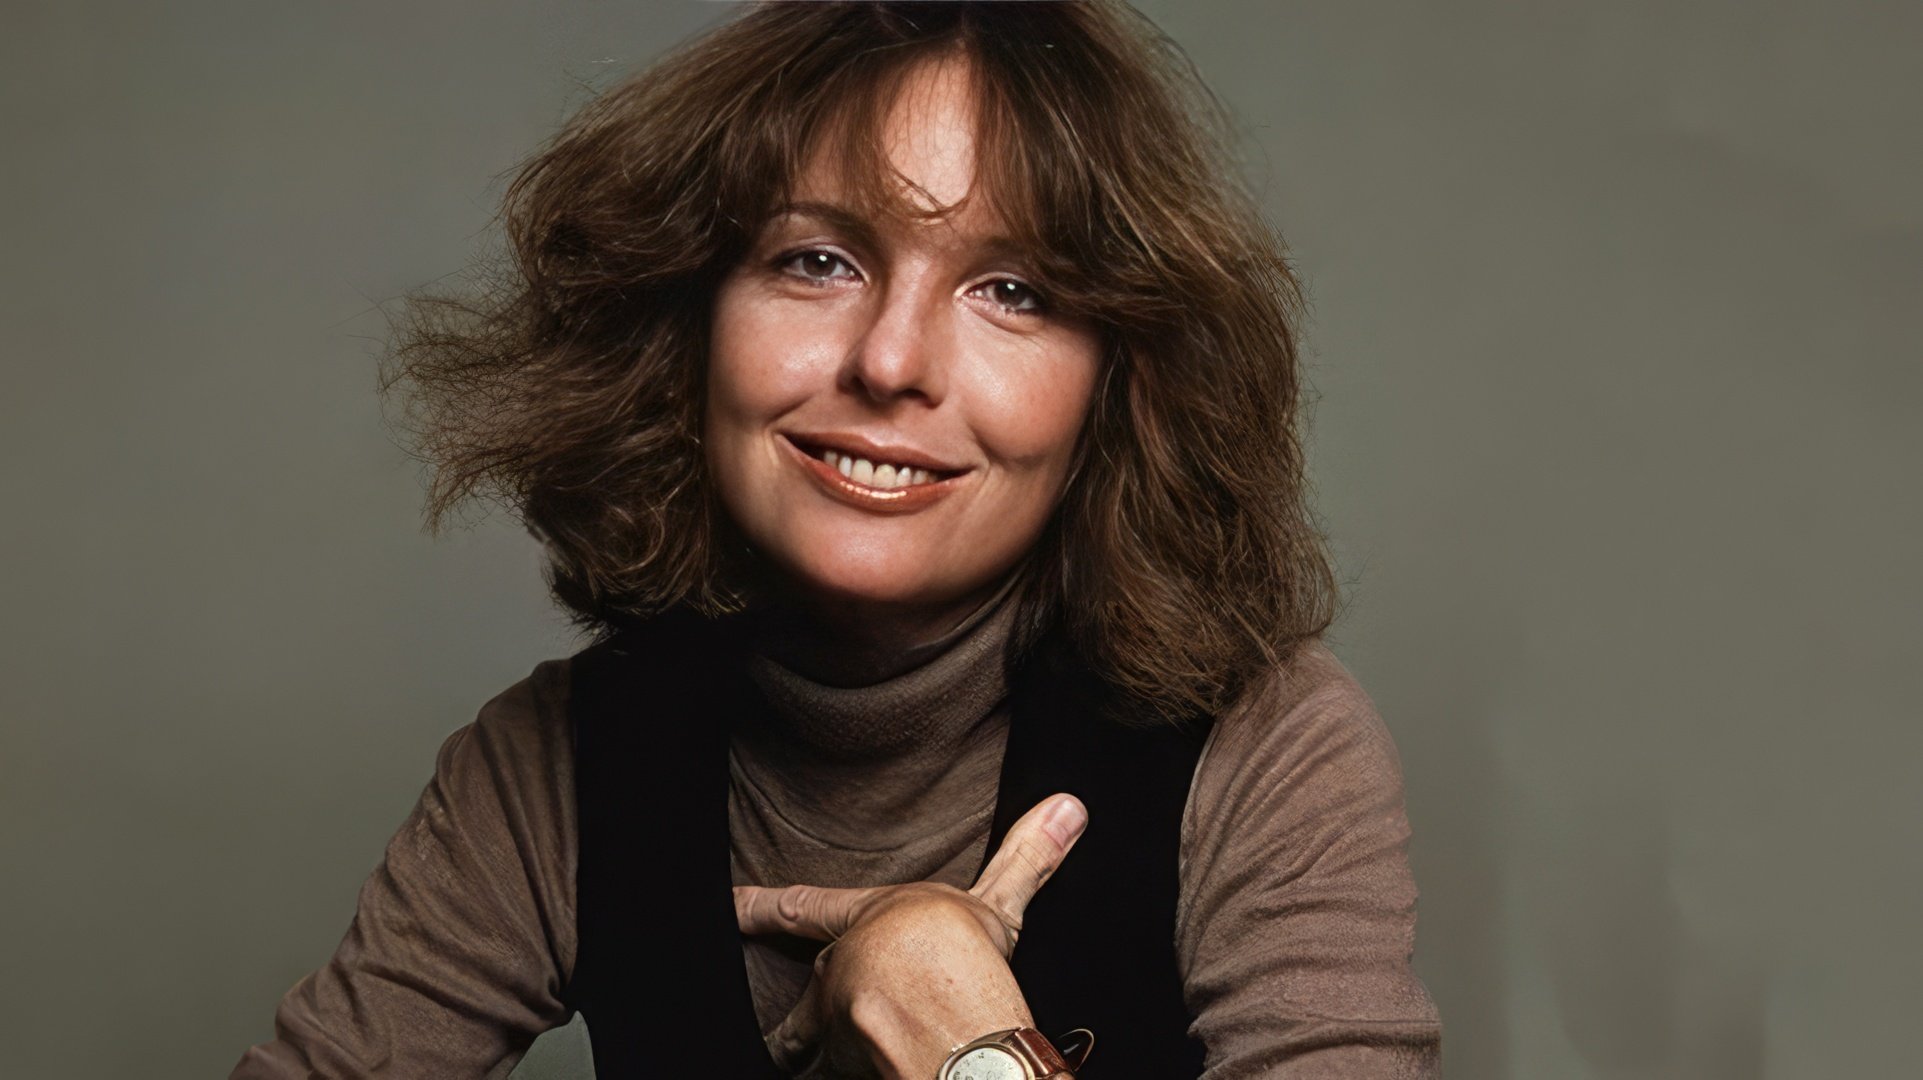 Diane Keaton in her youth